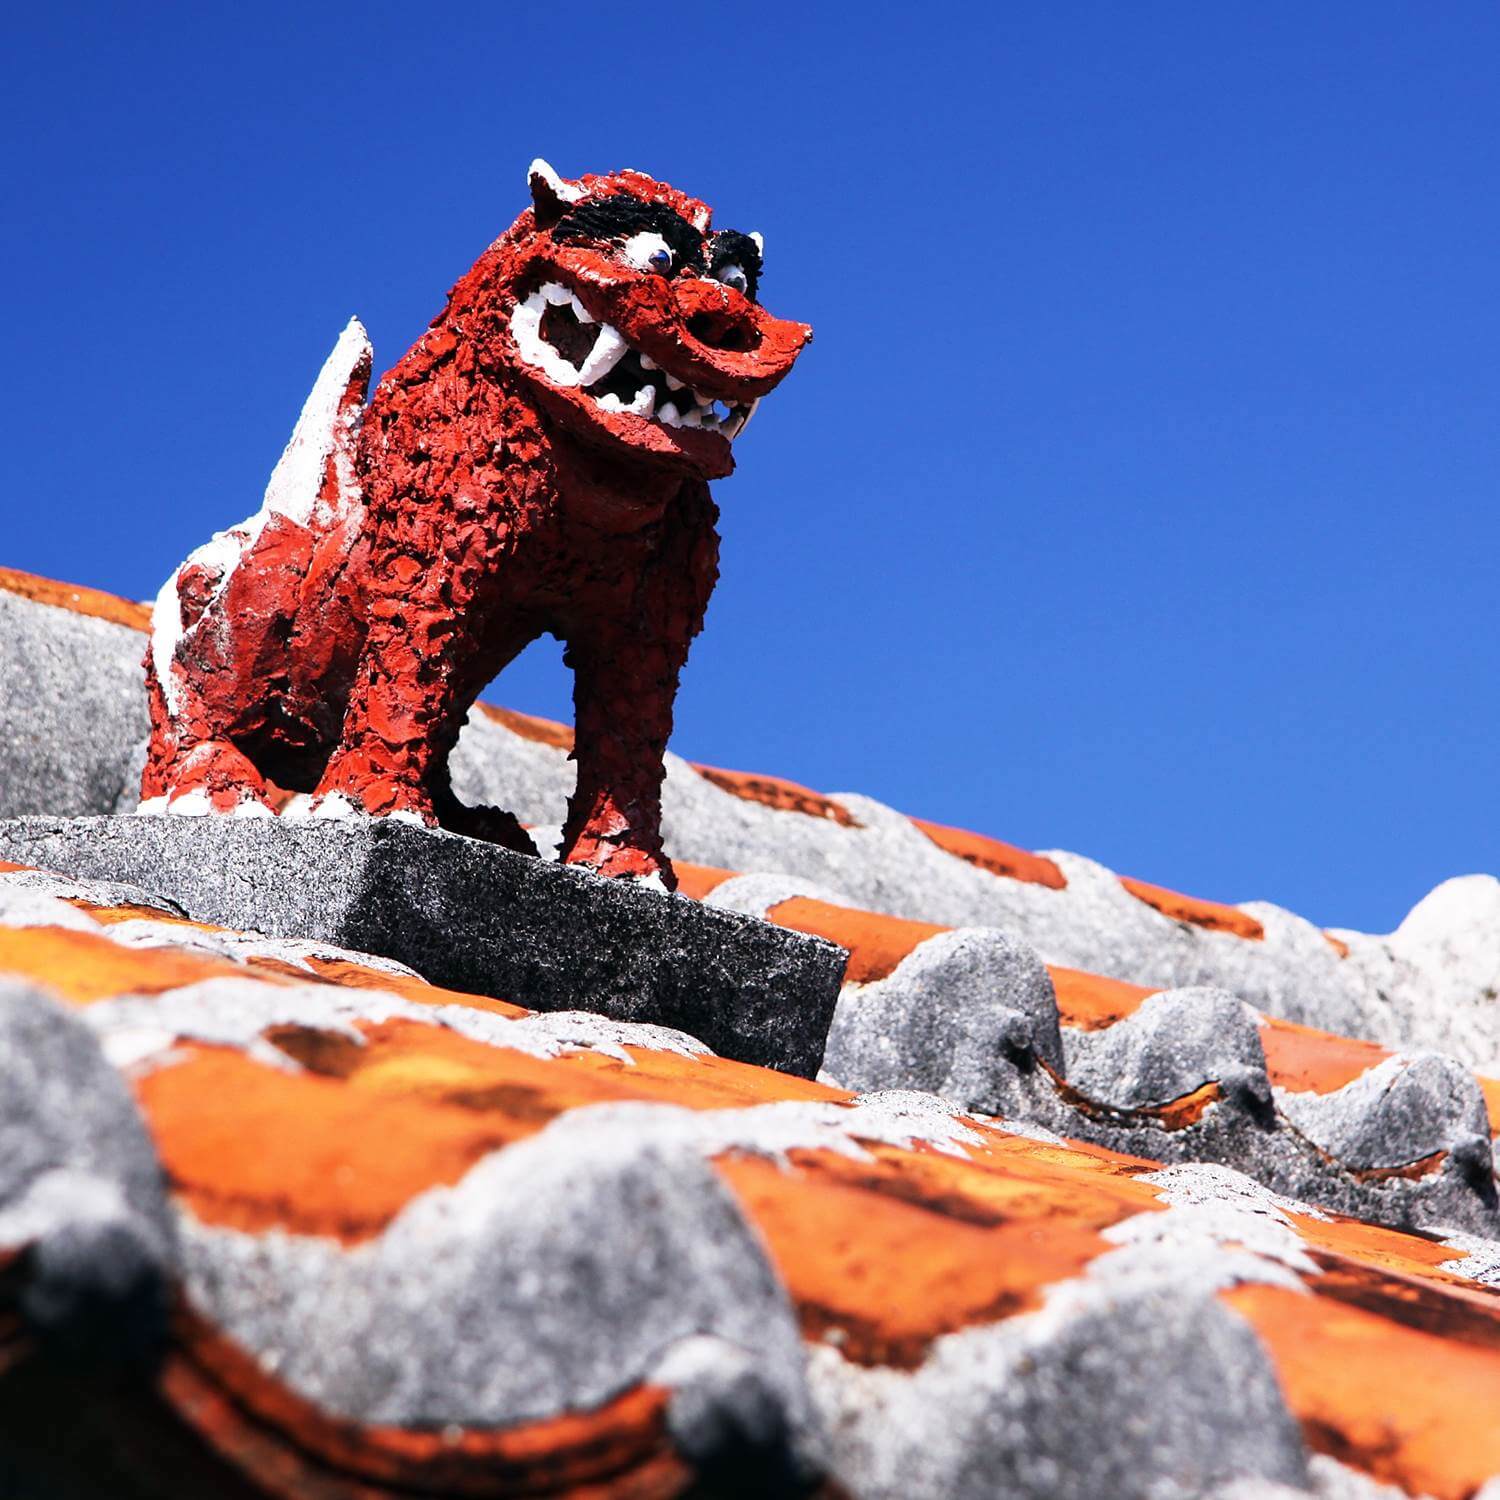 Shisa, which is said to drive away evil spirits, is placed on the roofs of Okinawan houses, Okinawa = Shutterstock